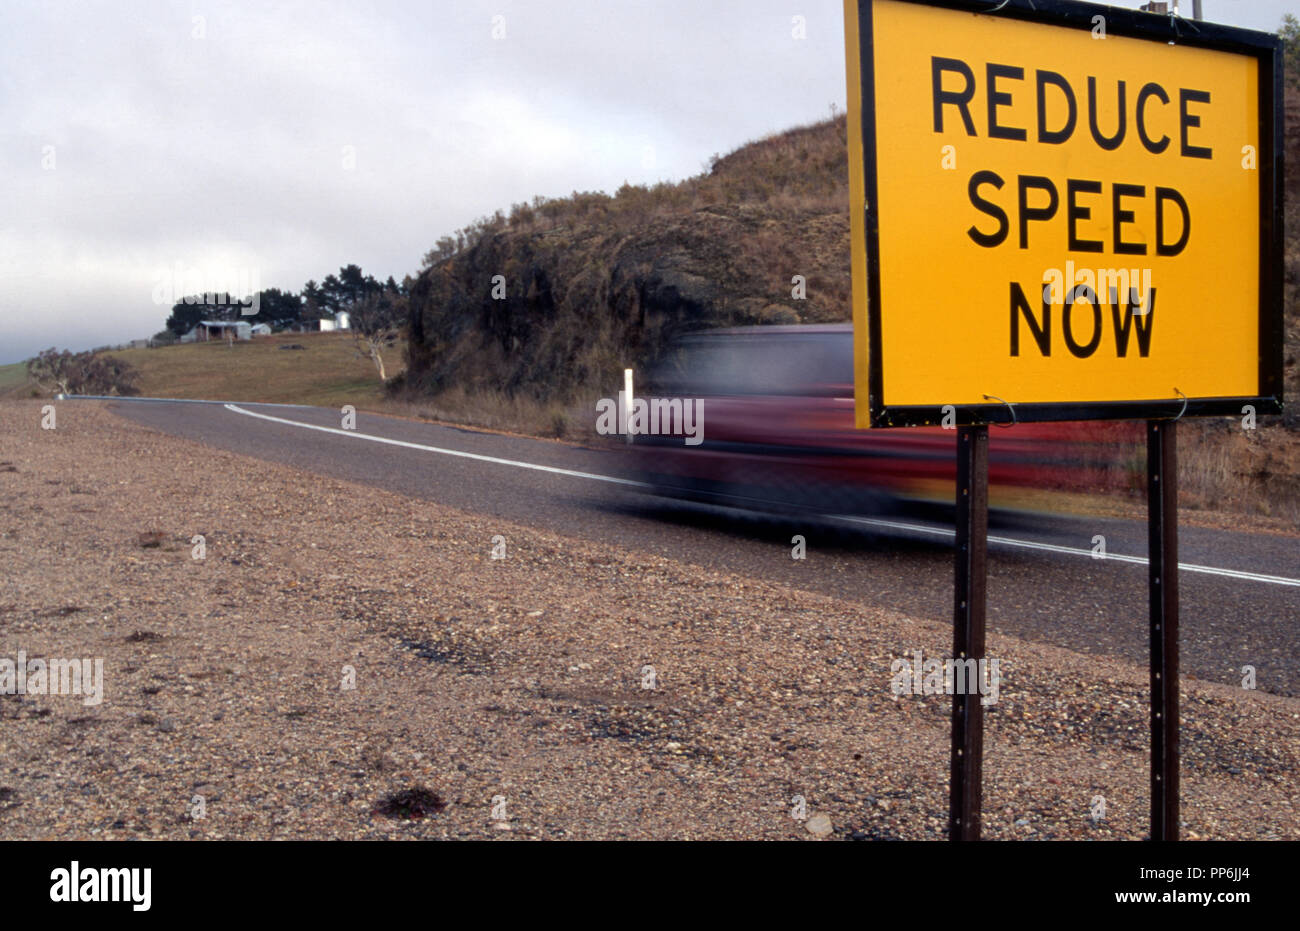 Reduce speed now sign on a country road in New South Wales, Australia Stock Photo